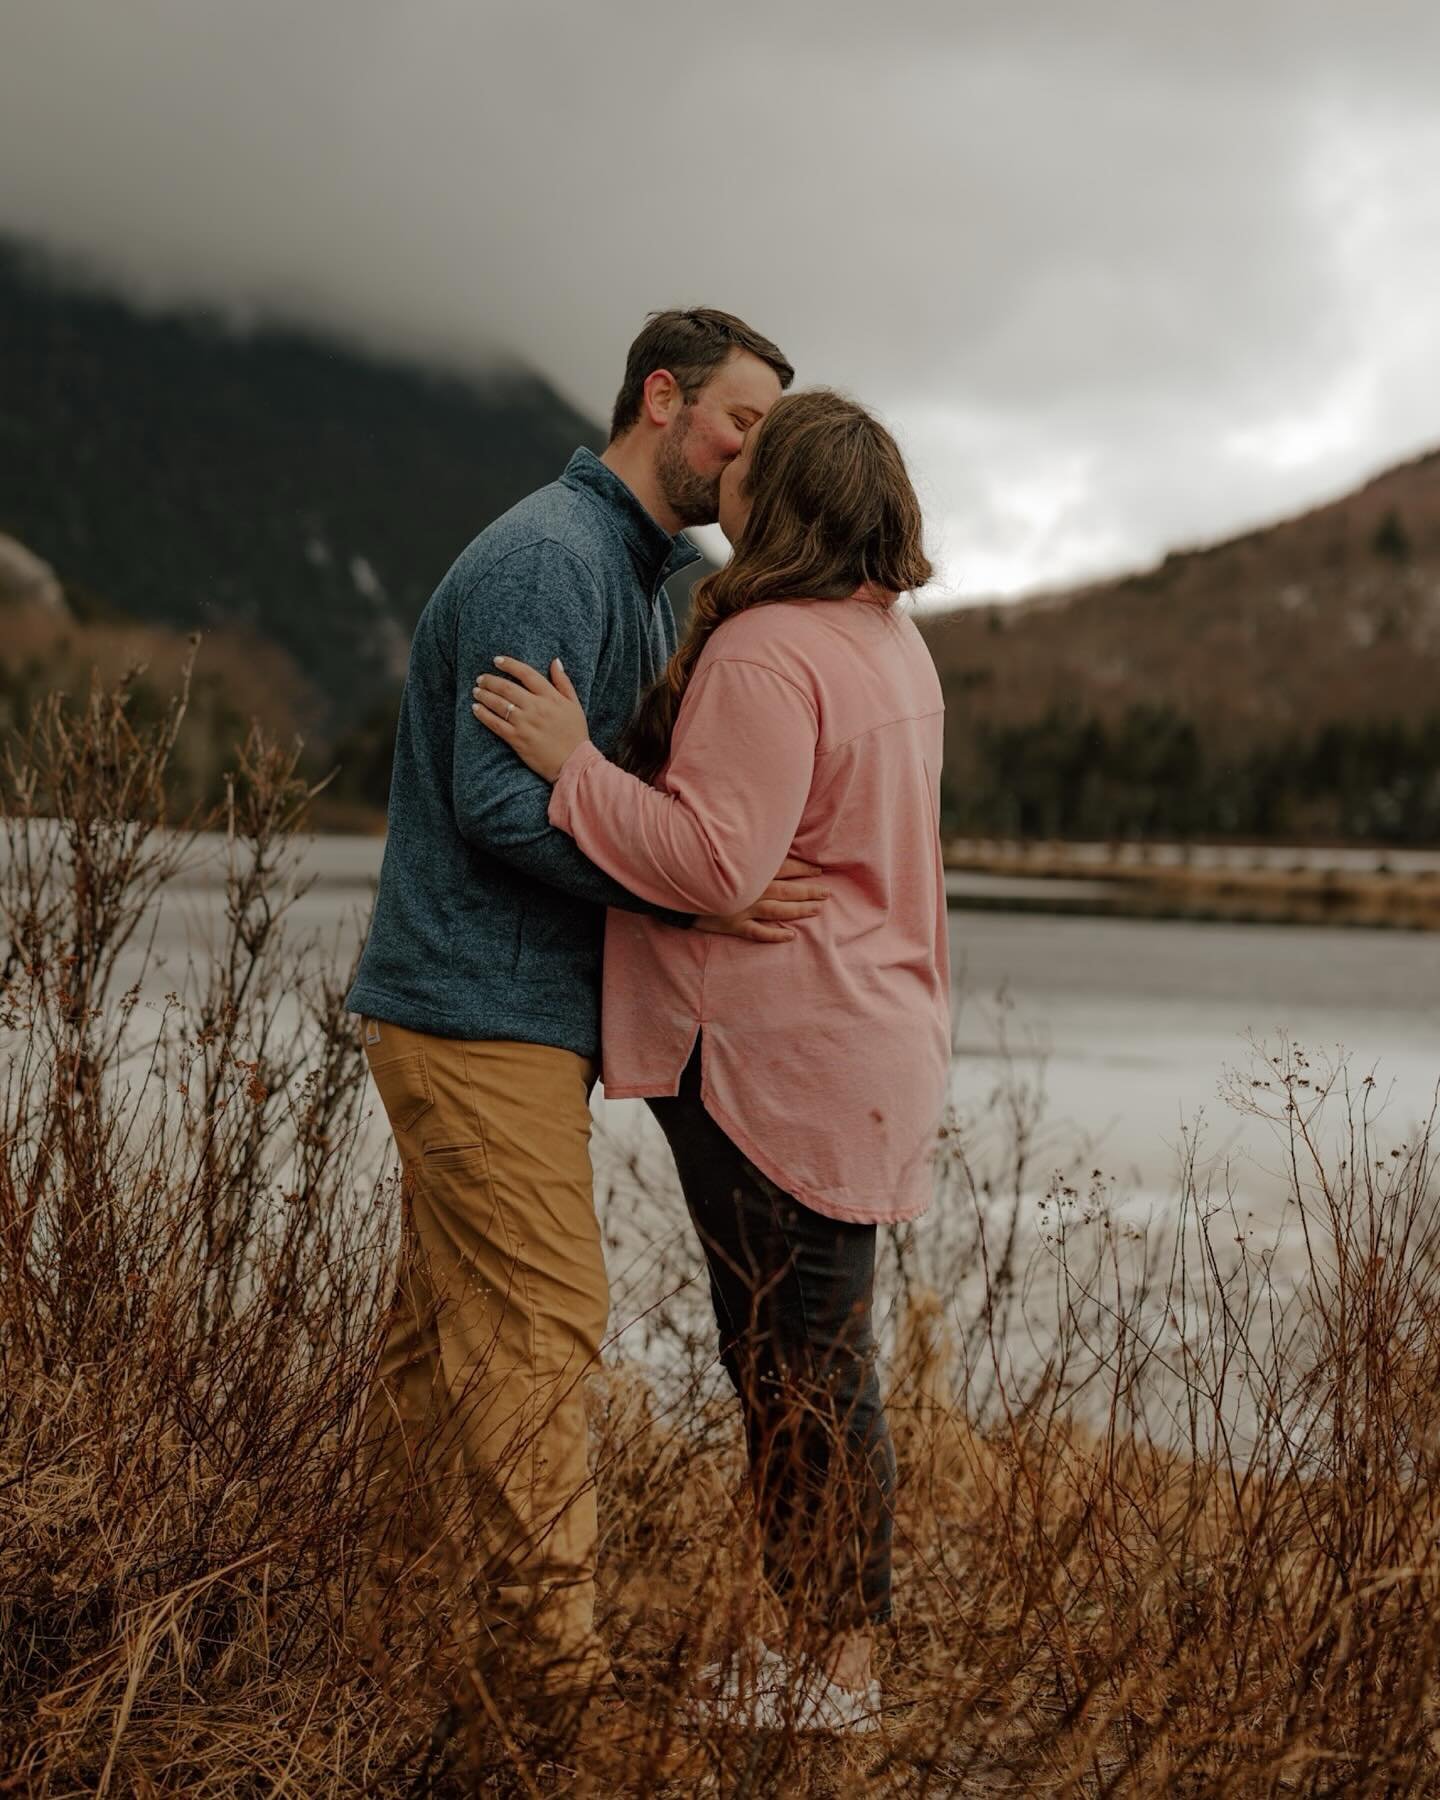 The moody fog and light drizzle on Saturday morning made for such a beautiful engagement session for S&amp;C. I can&rsquo;t promise sunshine for all our sessions, but I guarantee you&rsquo;ll be making special memories with your loved ones and sharin